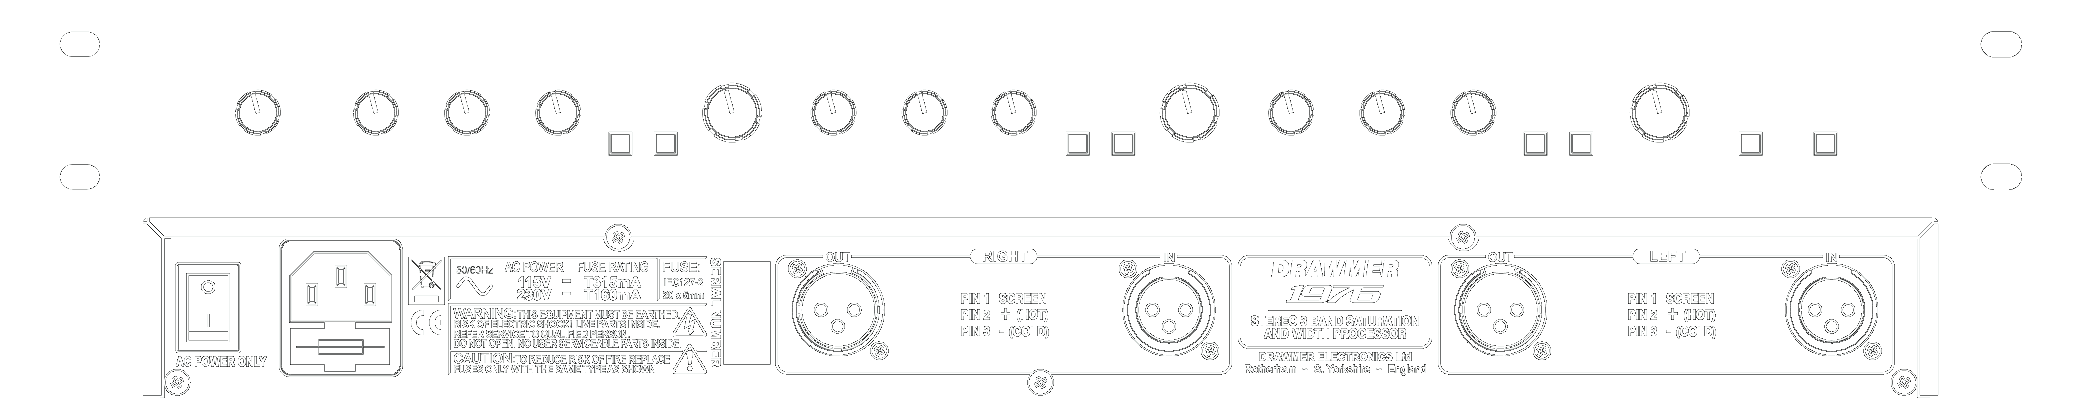 A line drawing of the front and rear panels of the 1976 showing controls and connectors